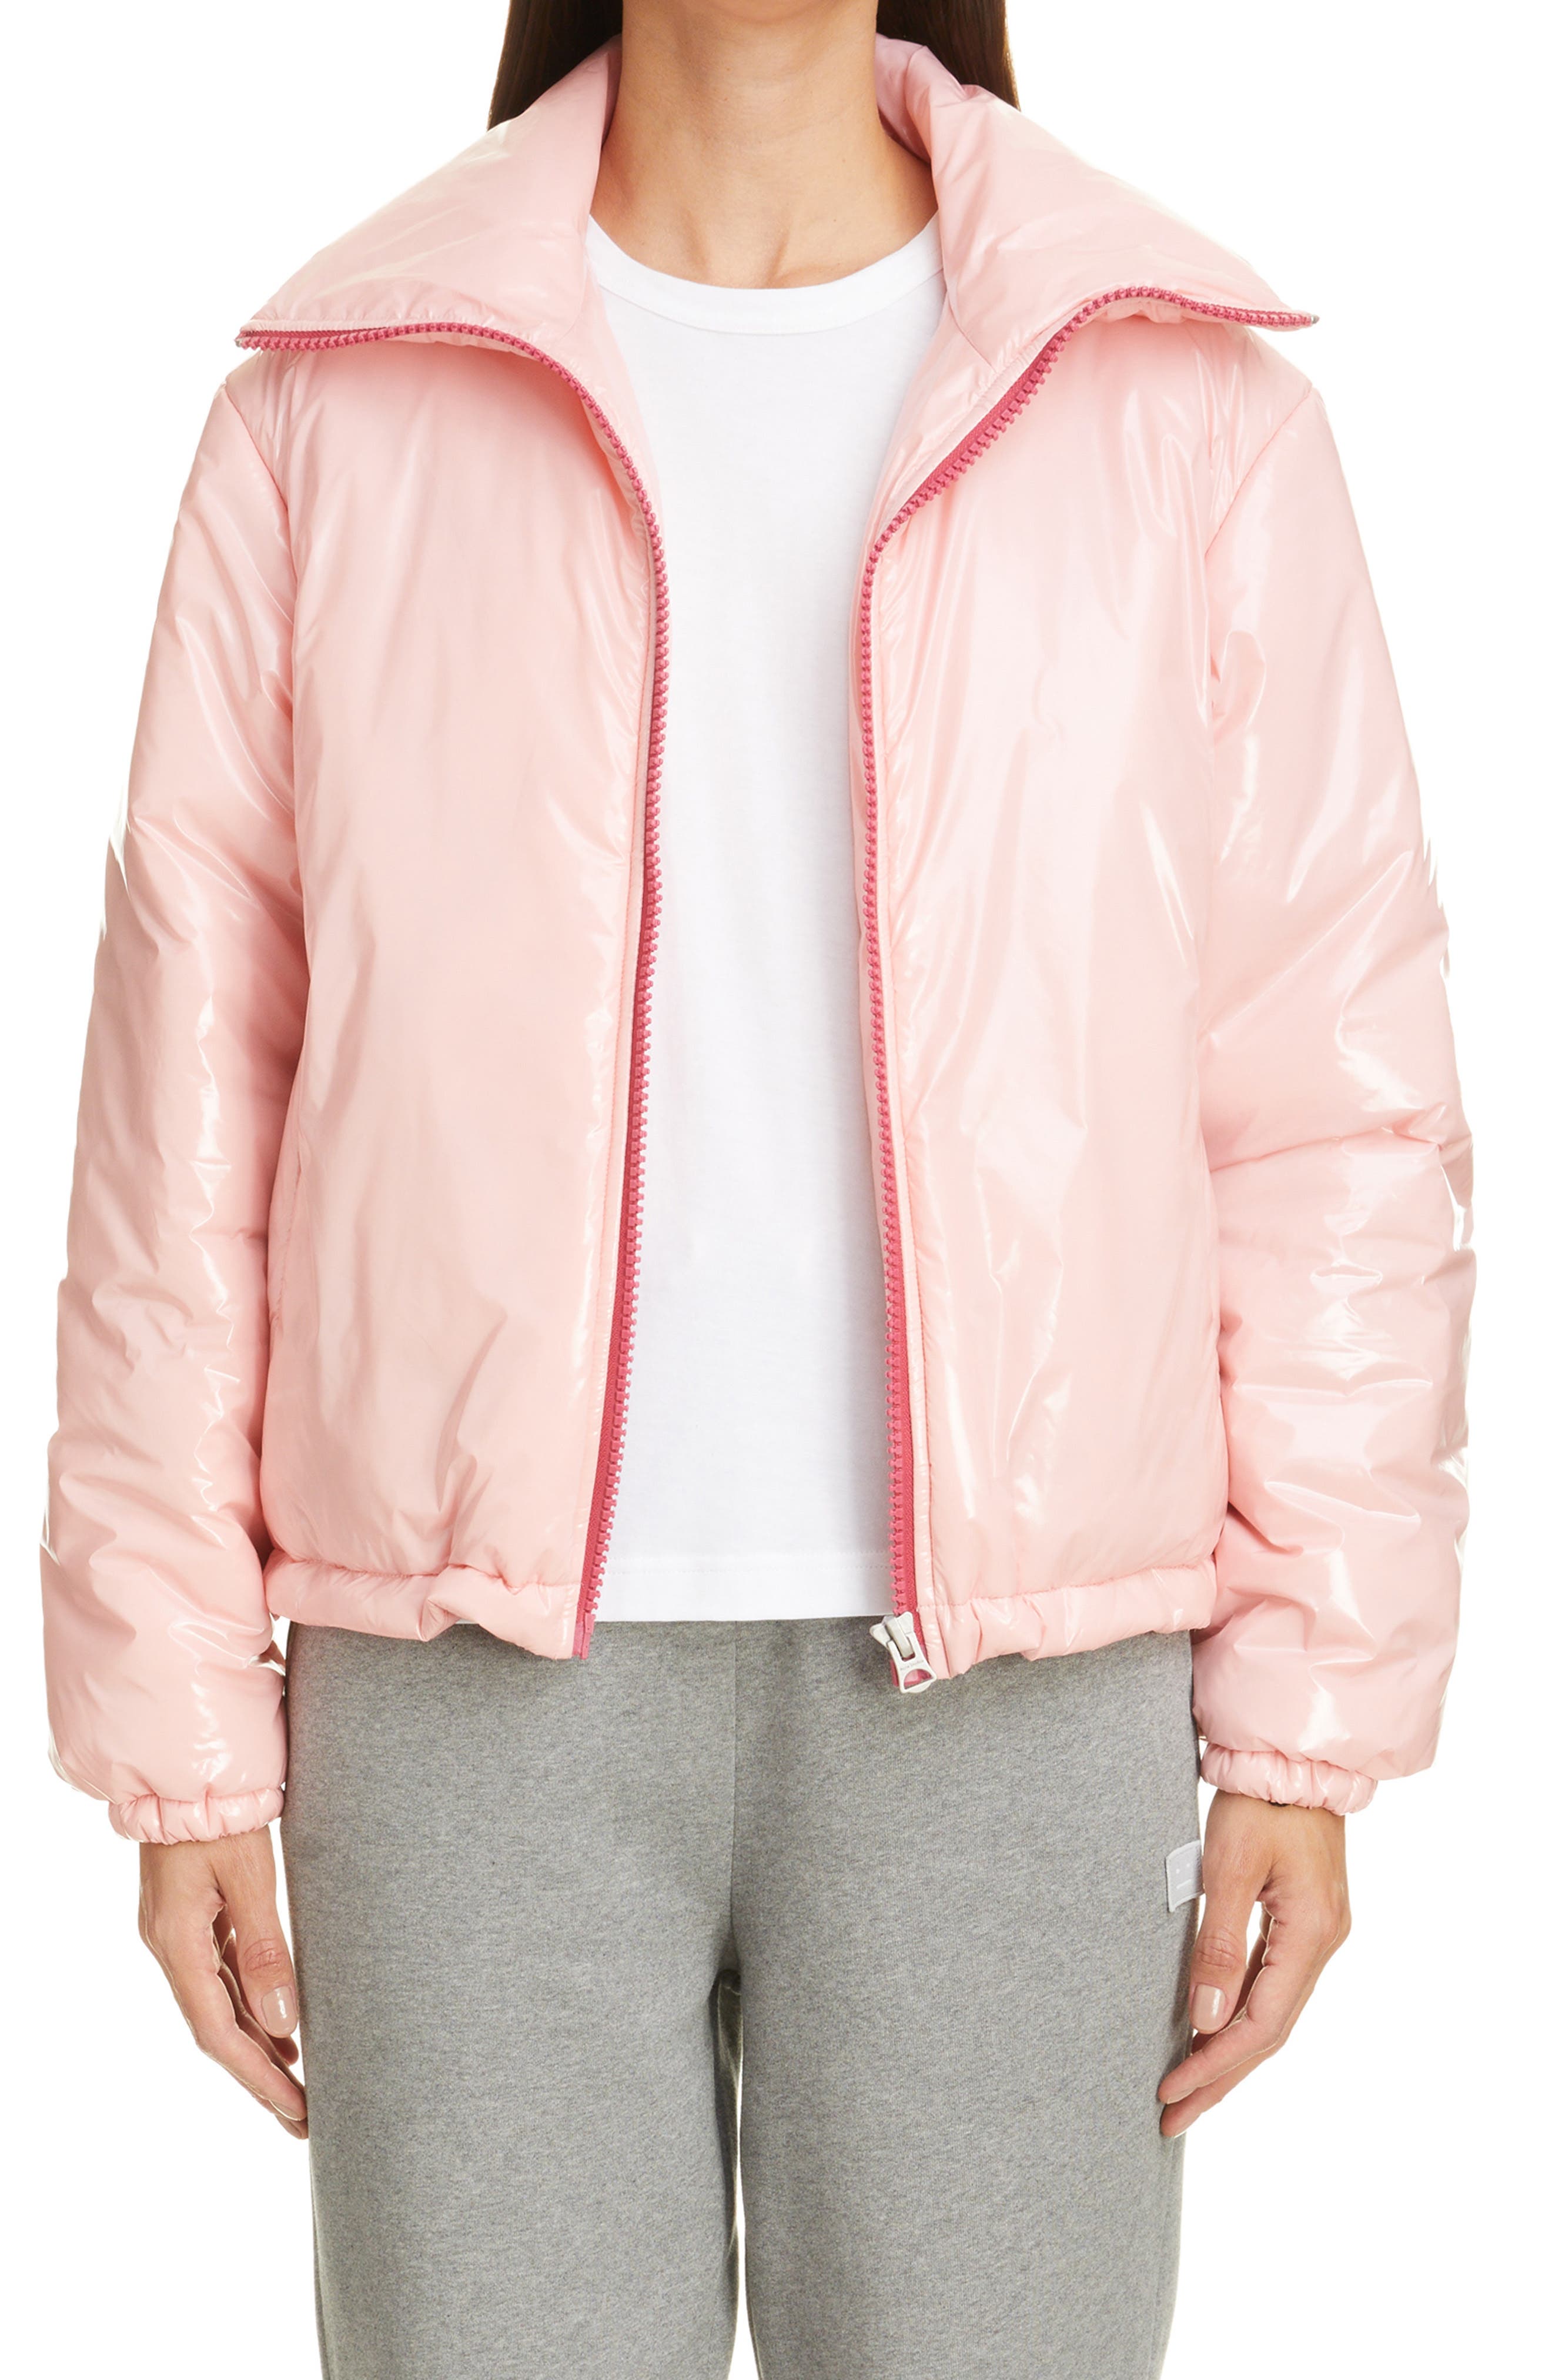 Acne Studios Oggy Face Patch Glossy Nylon Jacket in Blush Pink at Nordstrom, Size Large